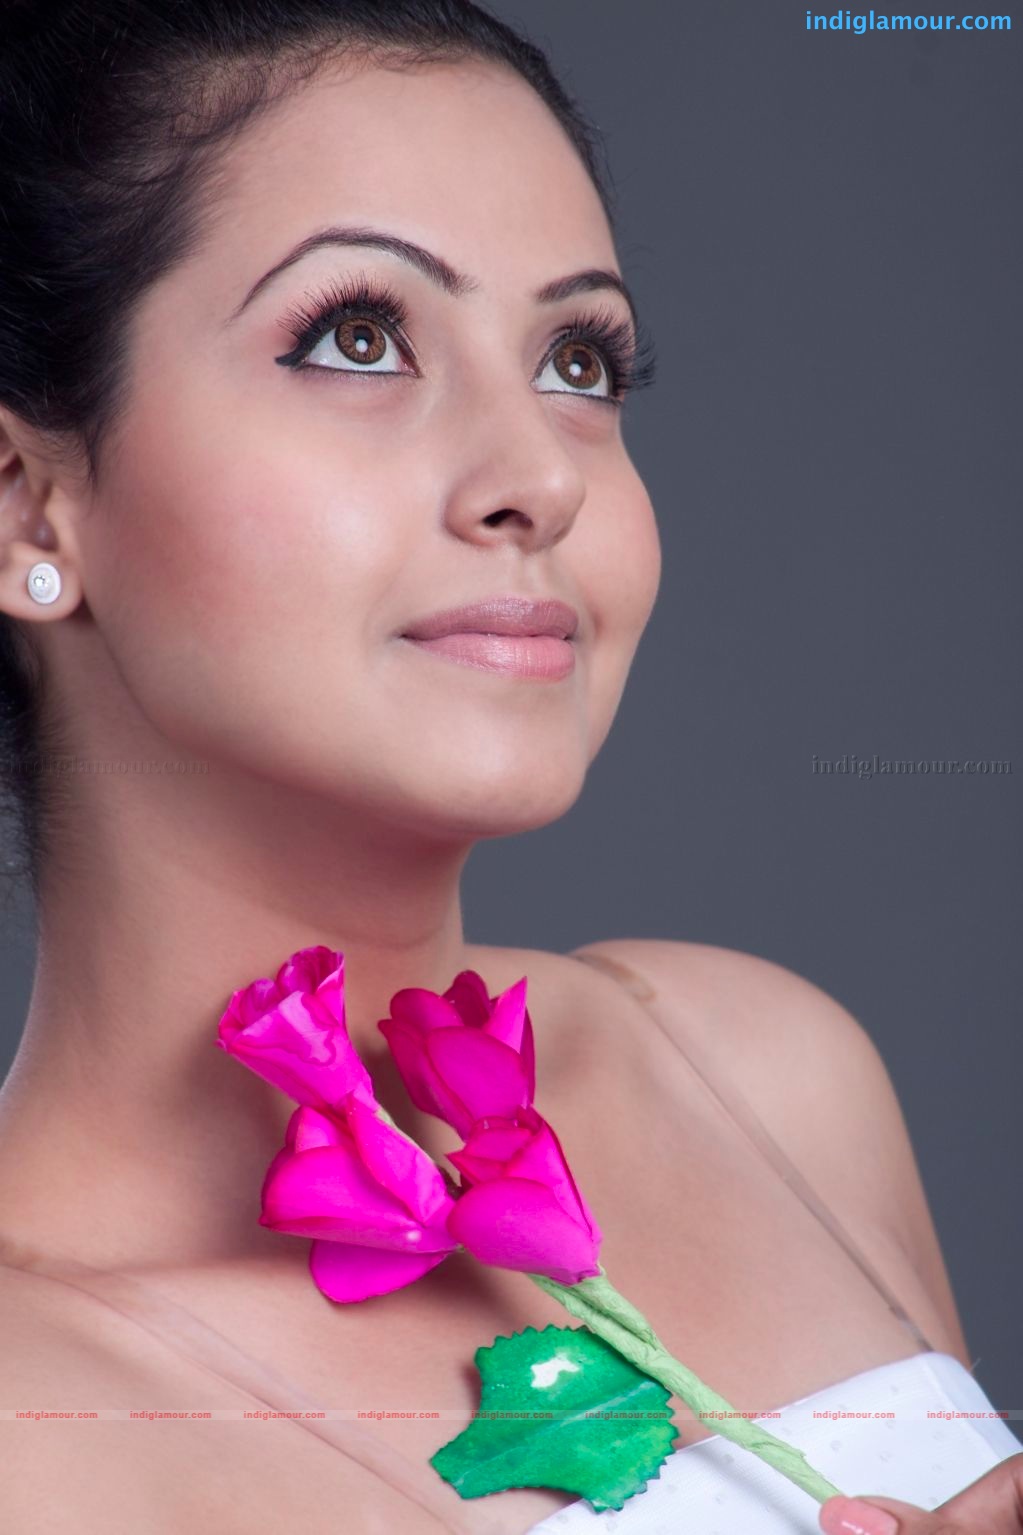 neelam gouhrani new face - model and actress...